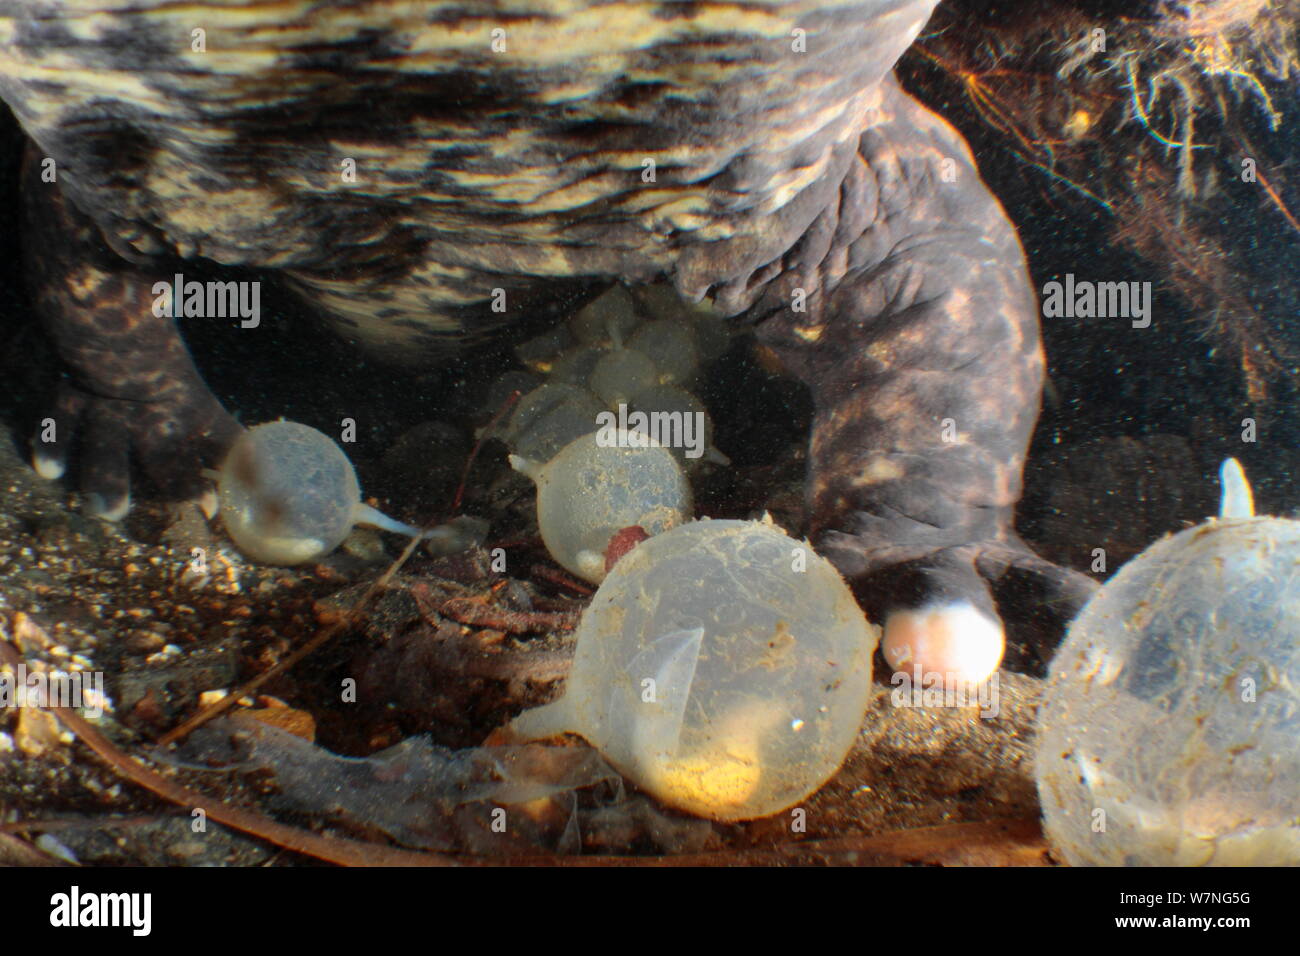 Male Japanese giant salamander (Andrias japonicus) protecting his eggs inside his nest, Japan, October Stock Photo